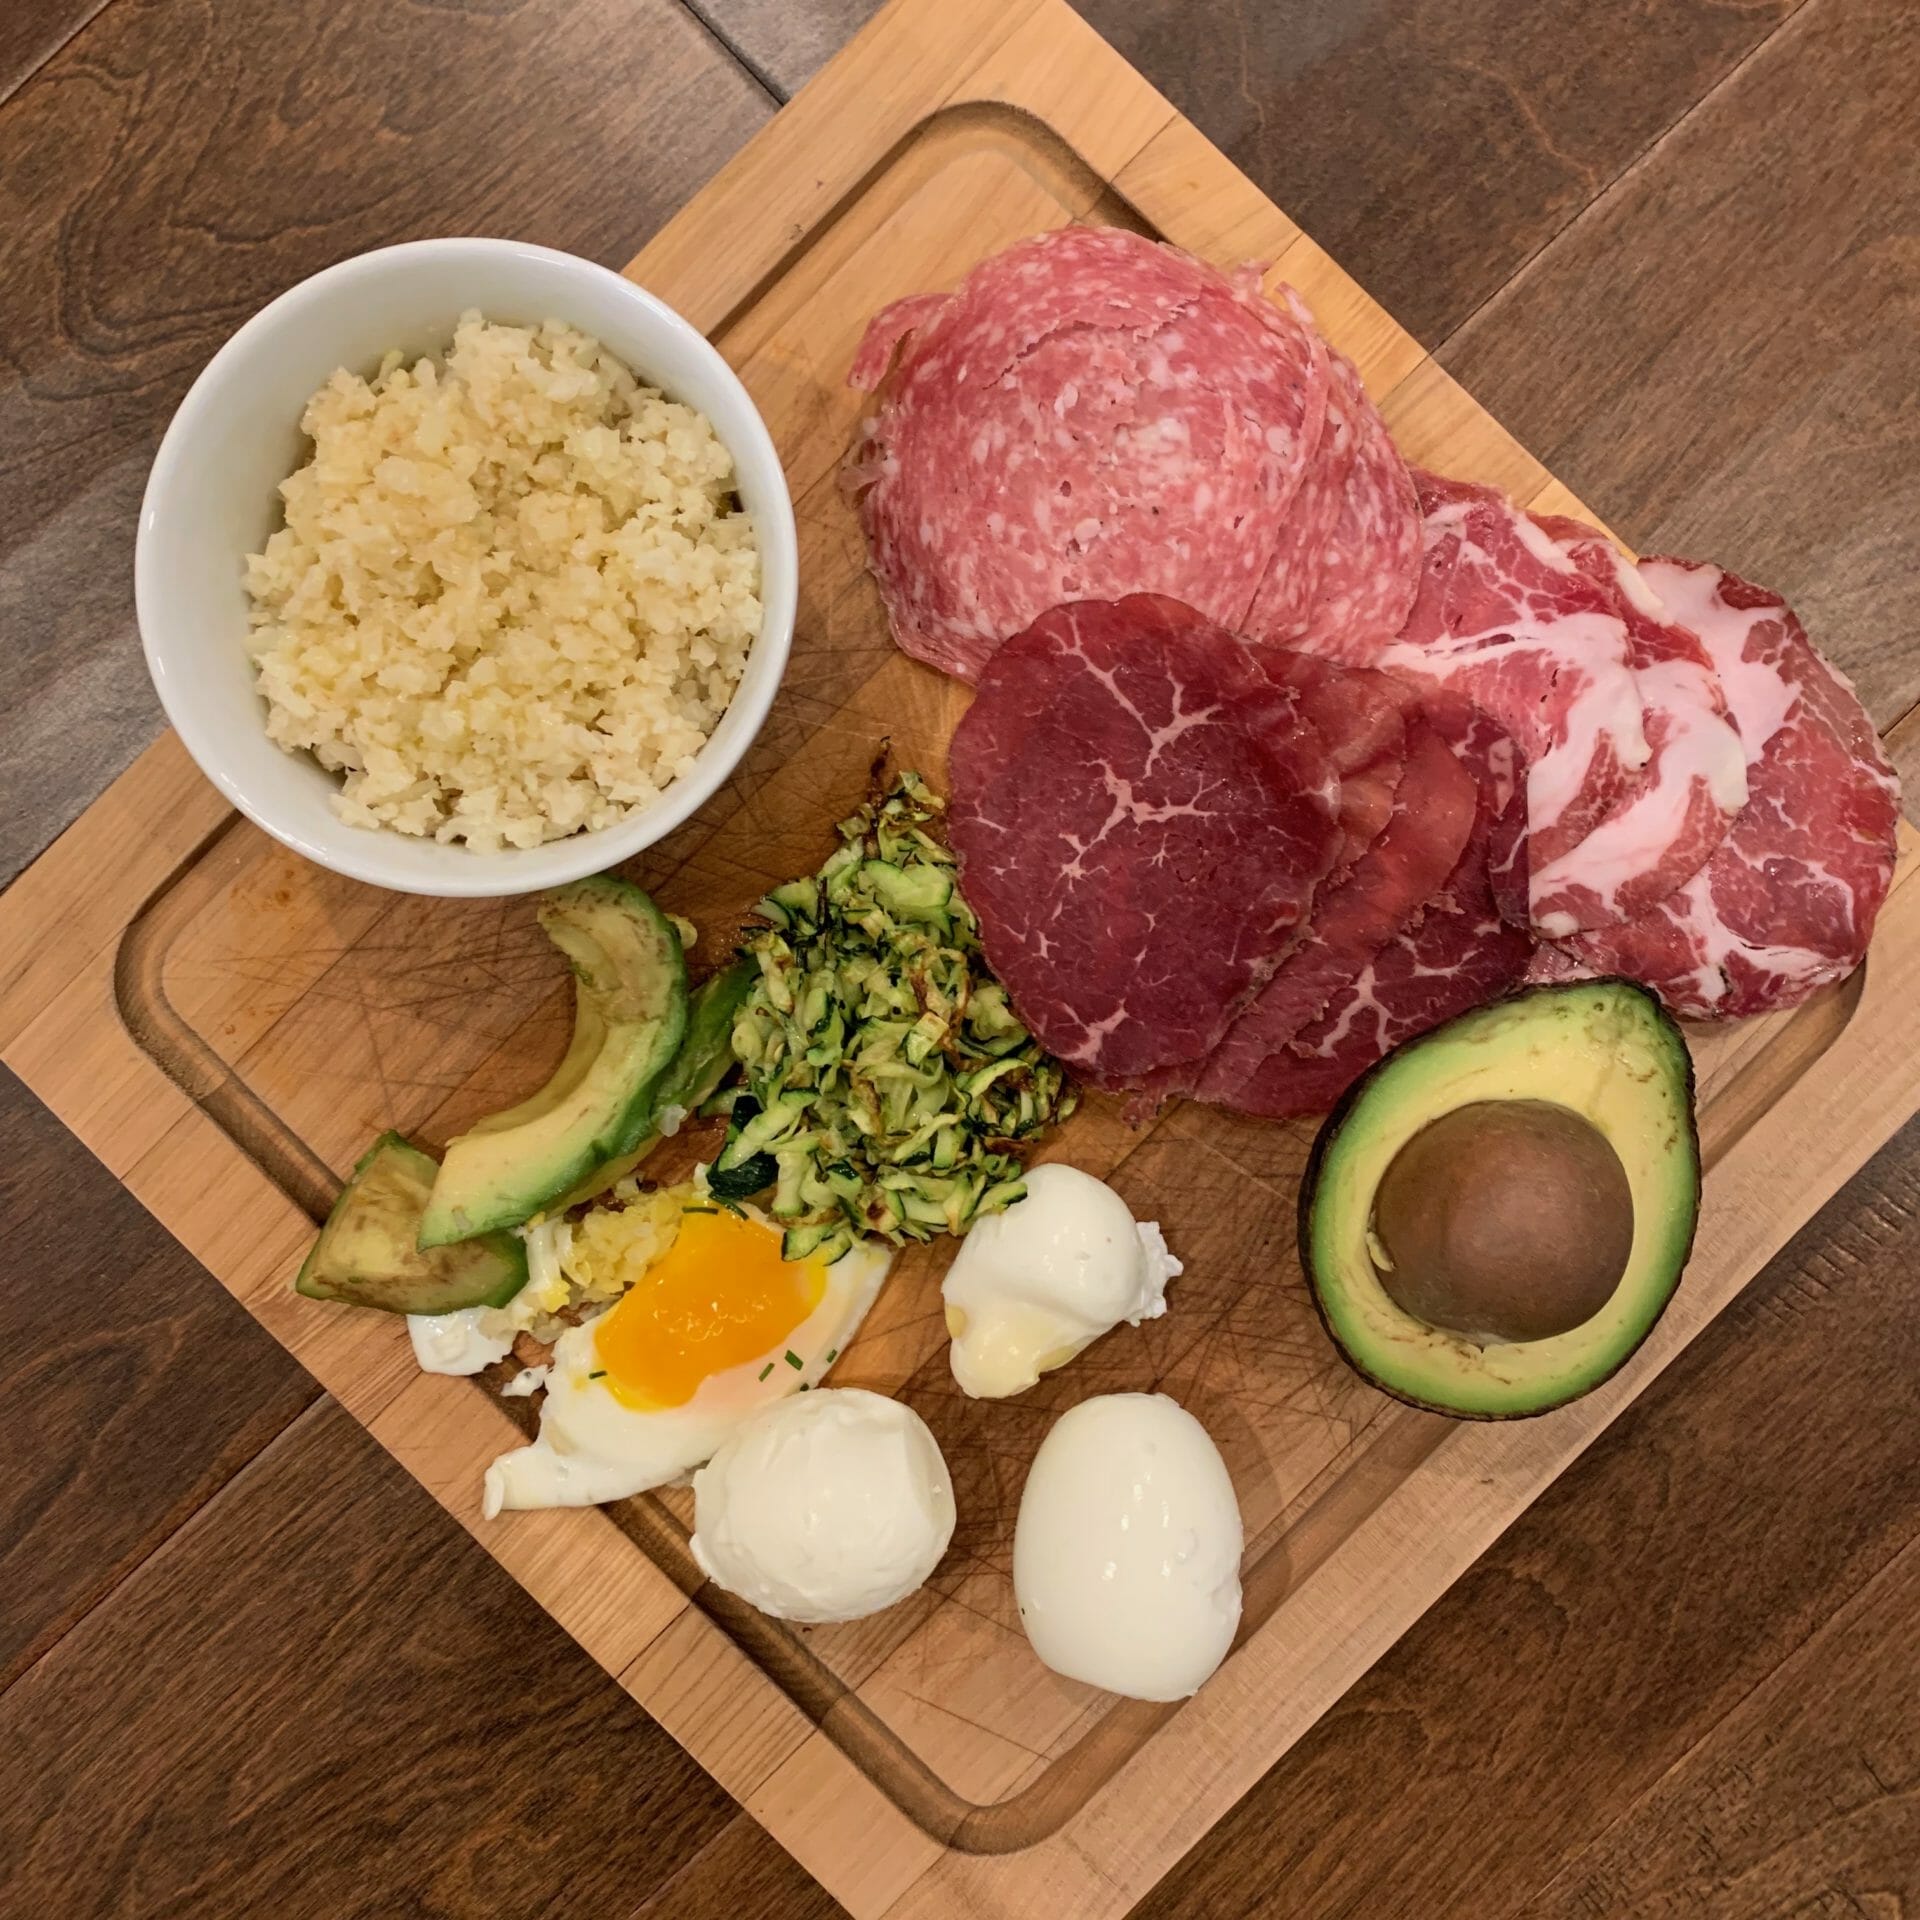 Dinner plate with riced cauliflower, uncured meats, avocado, soft-boiled eggs and riced zucchini